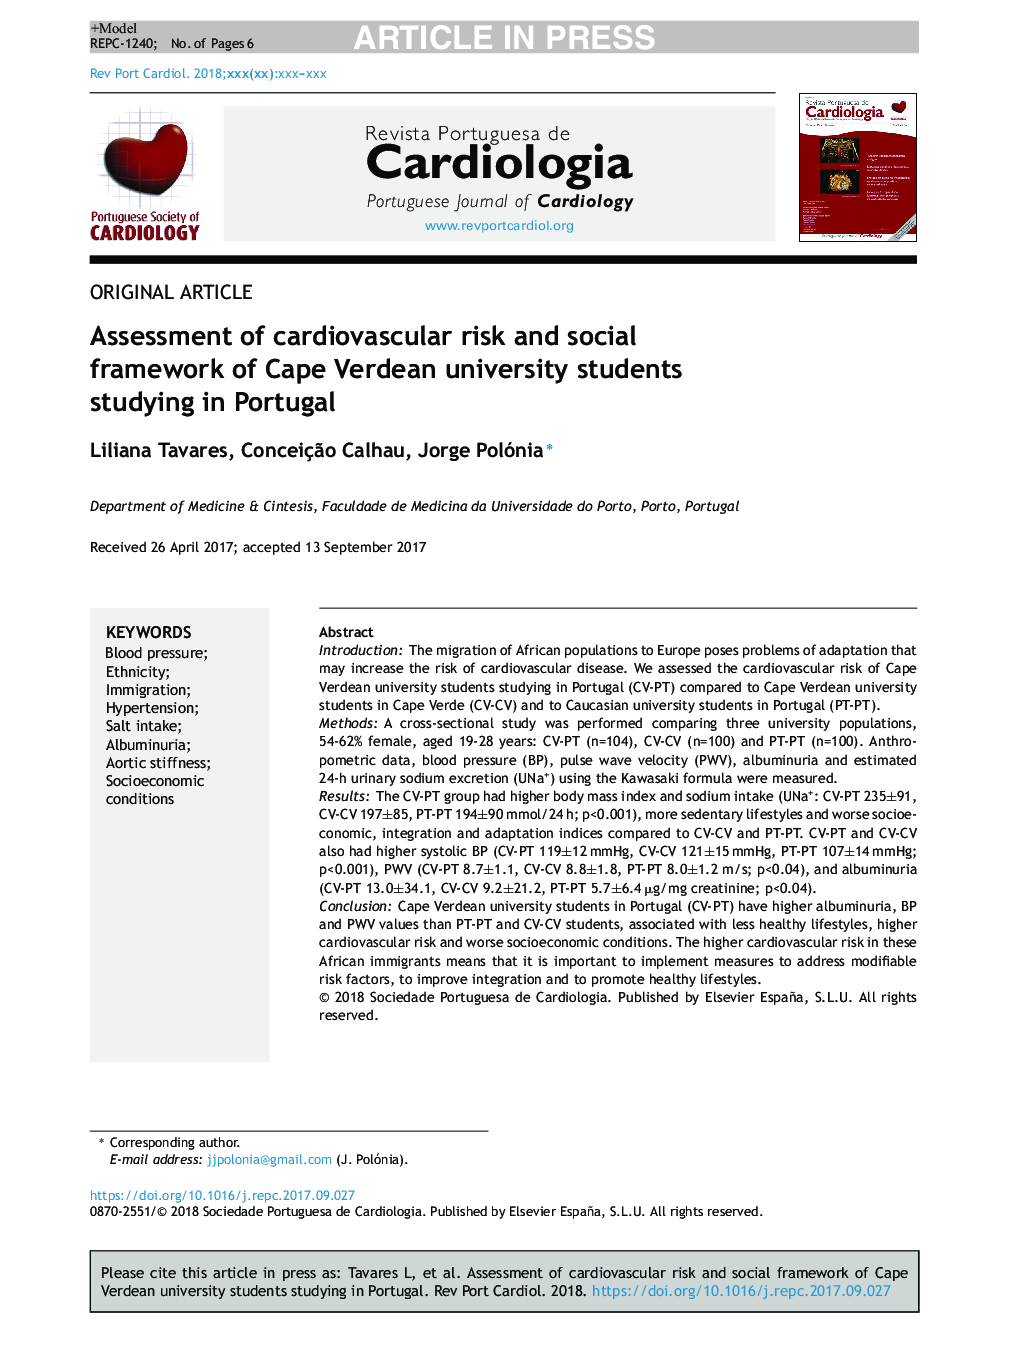 Assessment of cardiovascular risk and social framework of Cape Verdean university students studying in Portugal